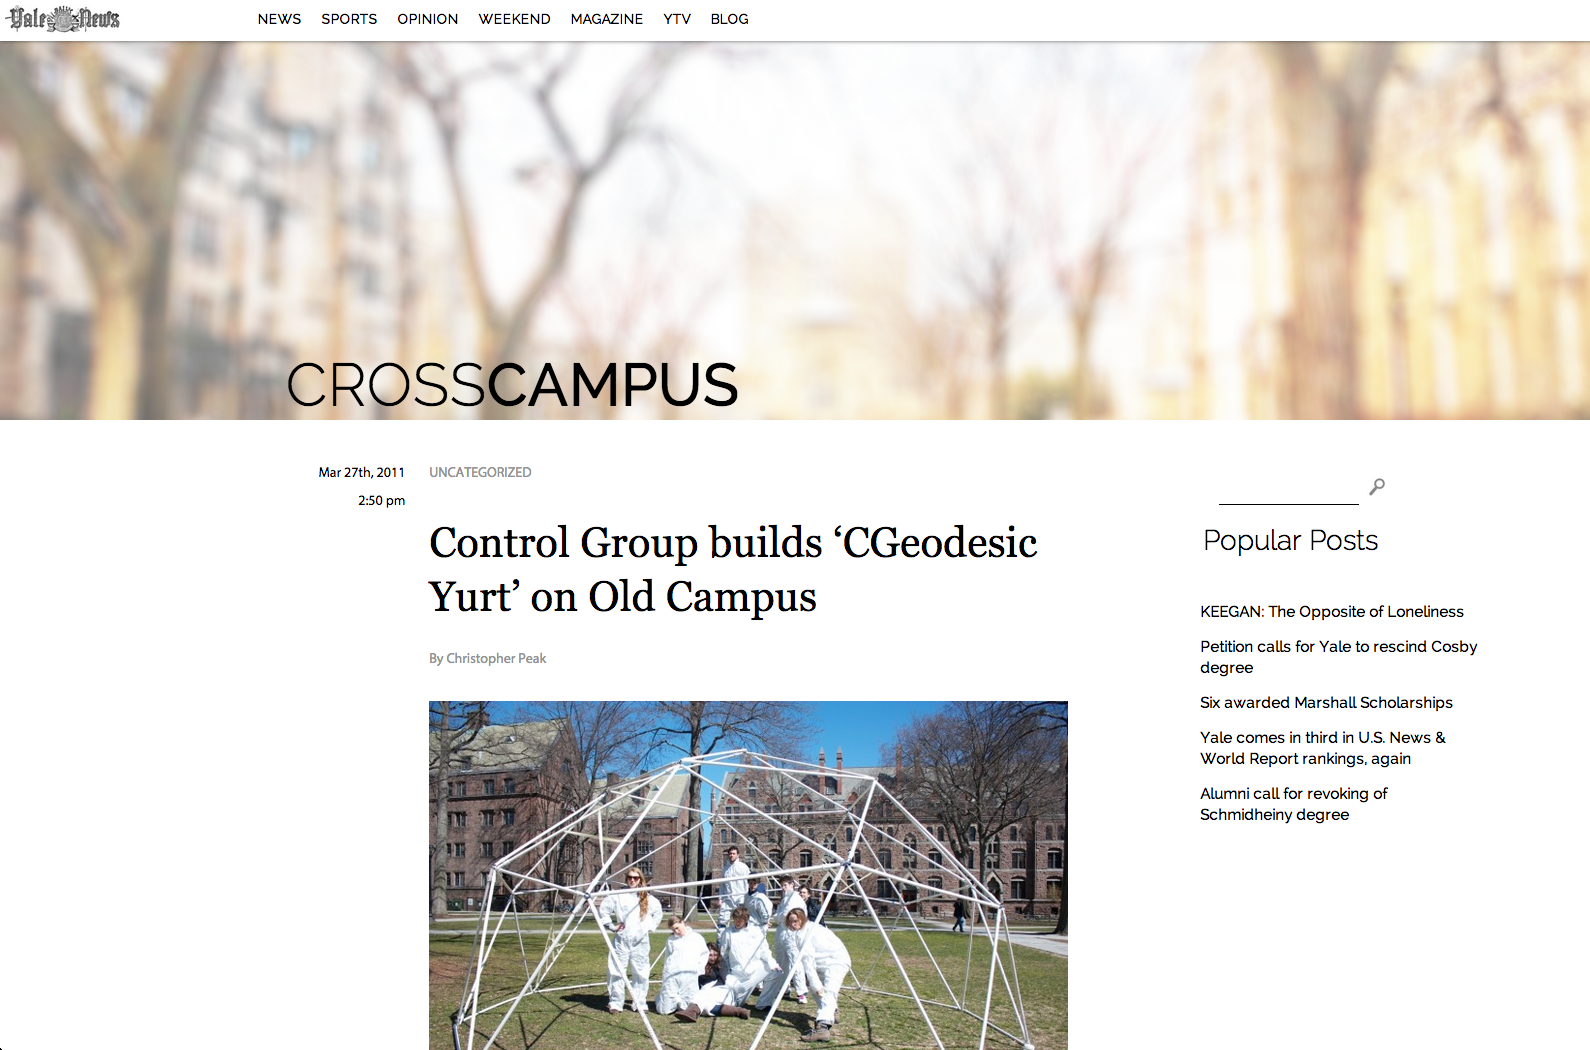 Control Group builds ‘CGeodesic Yurt’ on Old Campus